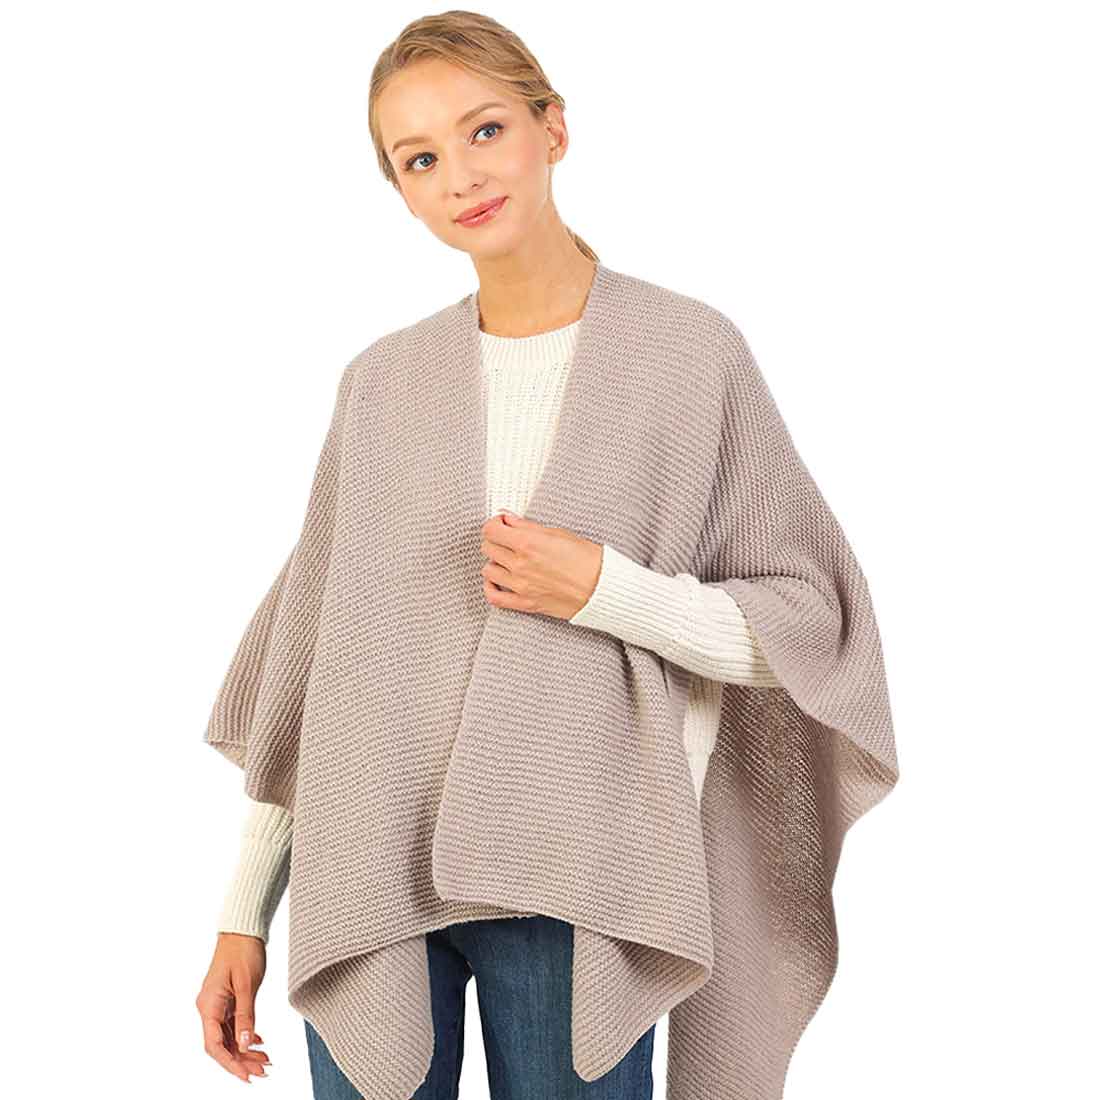 Gray  Solid Knitted Basic Cape, is beautifully designed with solid color that amps up your beauty to a greater extent. It enriches your attire with perfect combination. Breathable Fabric, comfortable to wear, and very easy to put on and off. Suitable for Weekend, Work, Holiday, Beach, Party, Club, Night, Evening, Date, Casual and Other Occasions in Spring, Summer and Autumn. Perfect Gift for Wife, Mom, Birthday, Holiday, Anniversary, Fun Night Out.